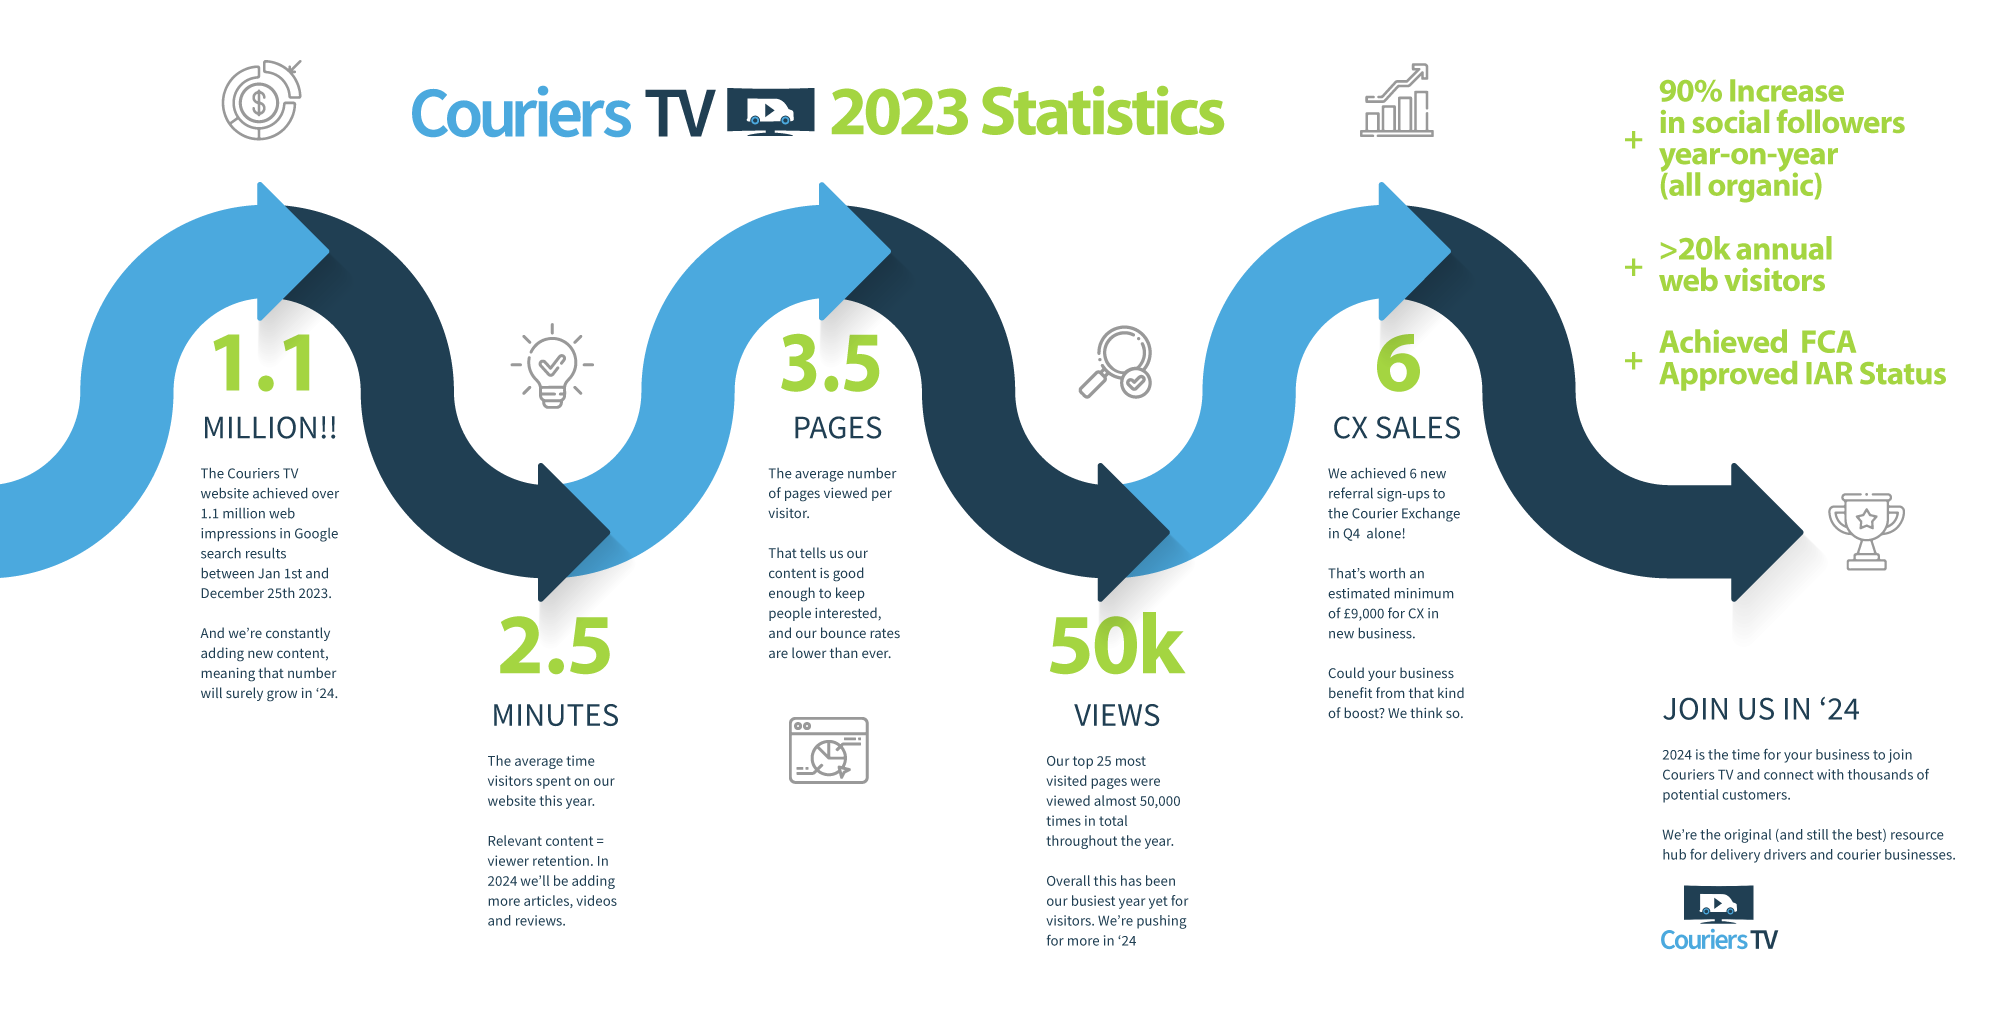 An infographic showing data relating to the Couriers TV website's performance in 2023